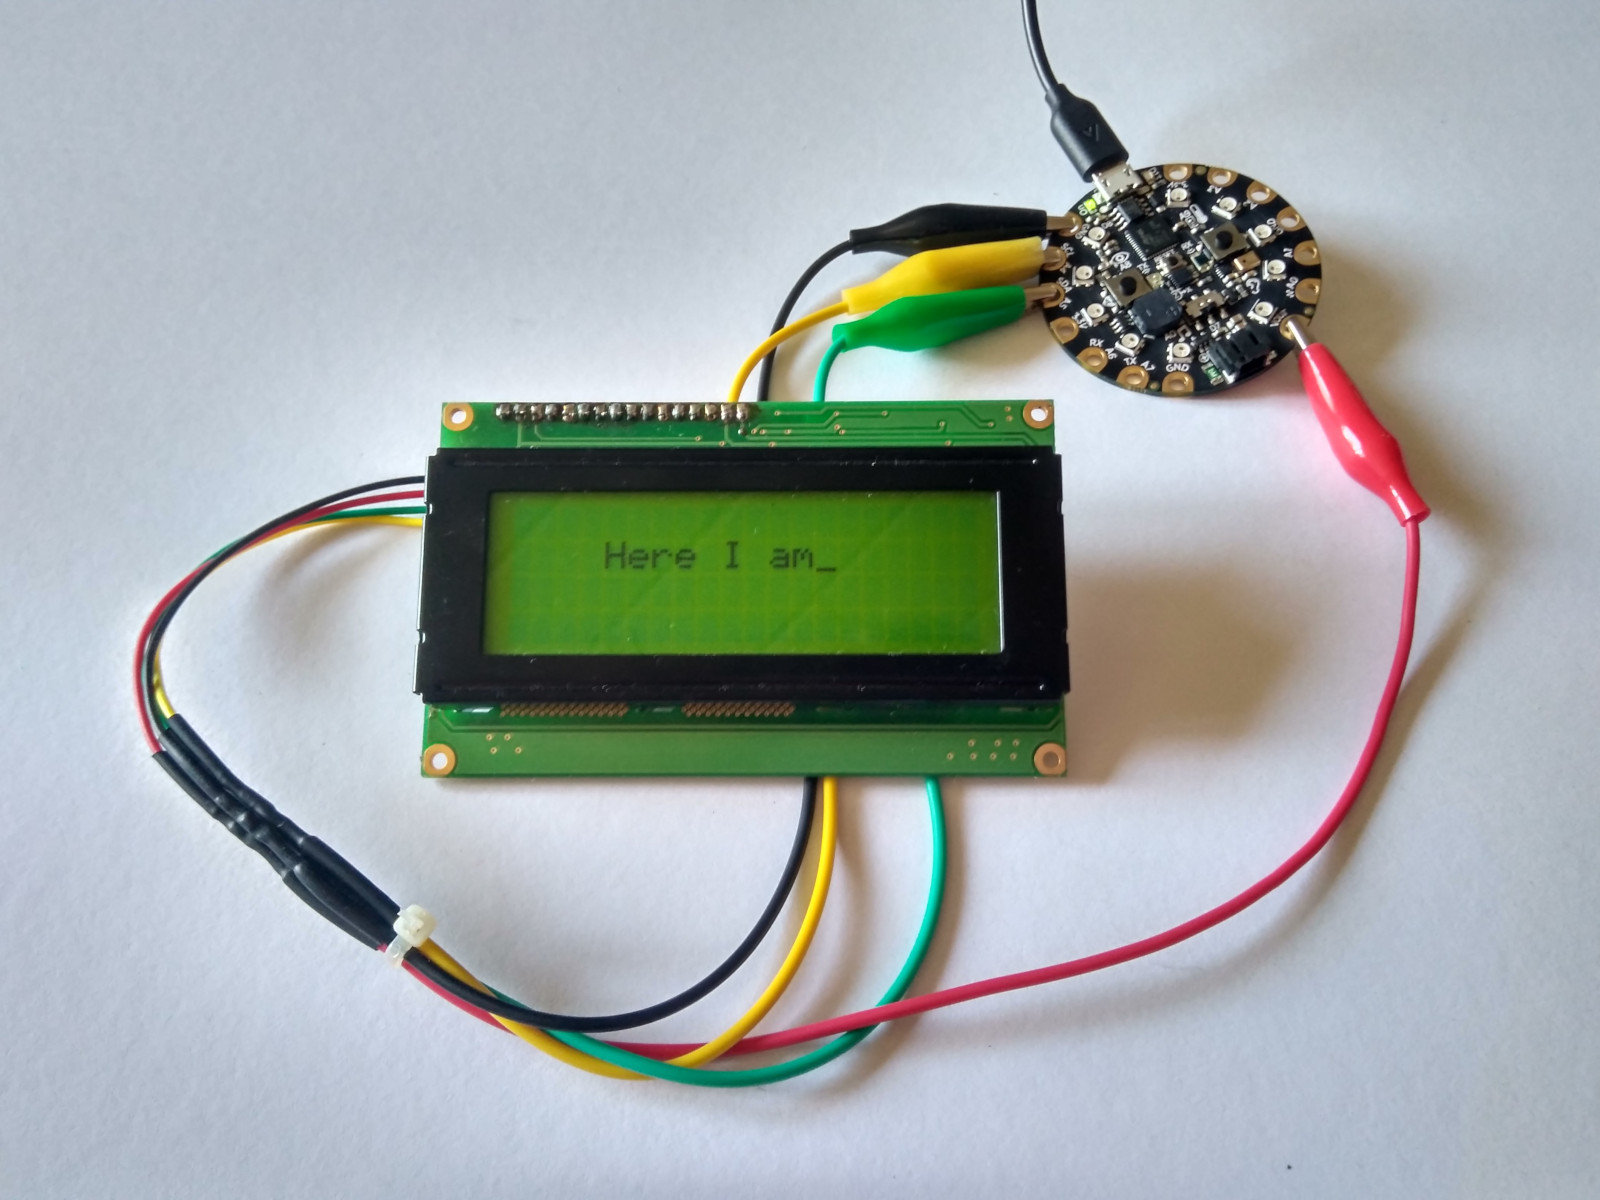 Image of the LCD in action